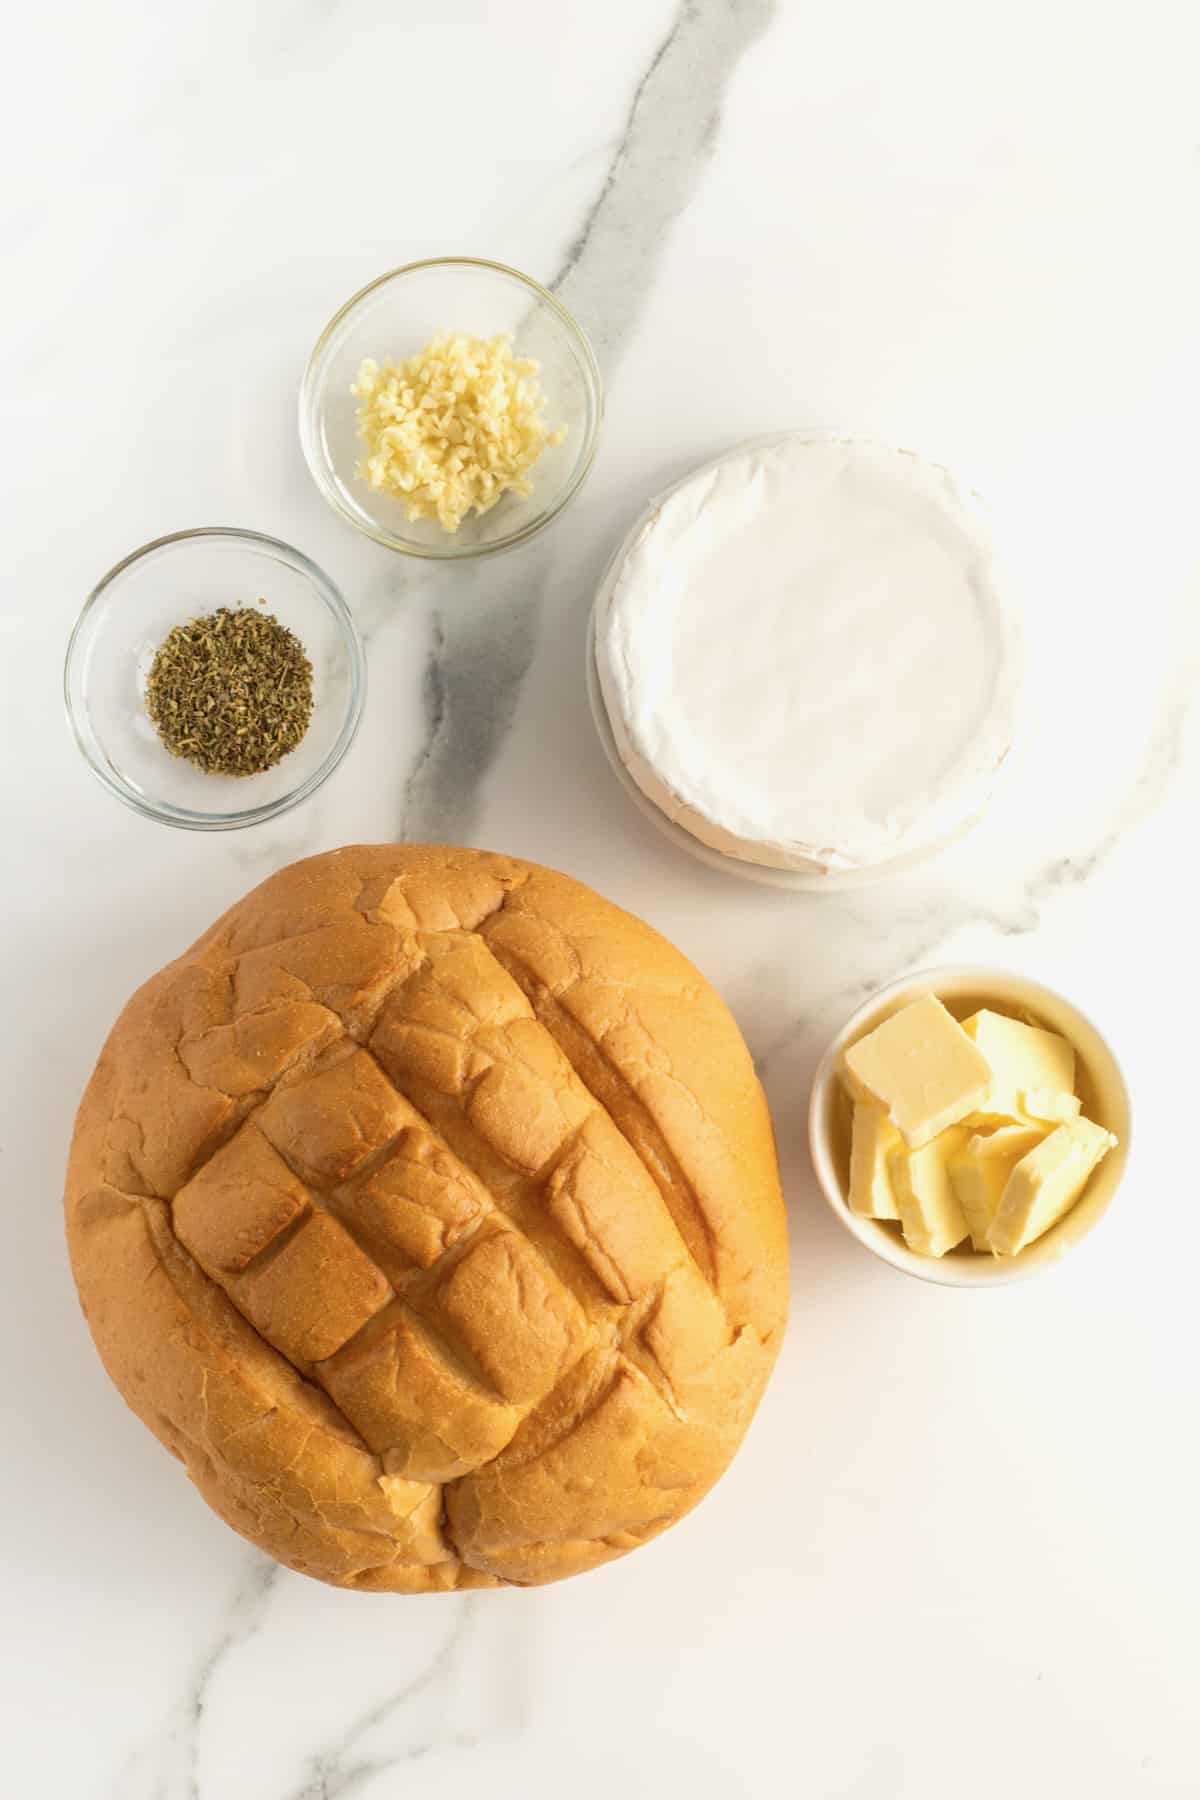 A bread bowl on a marble countertop, next to a wheel of brie and glass bowls filled with garlic, butter, and Italian seasoning.